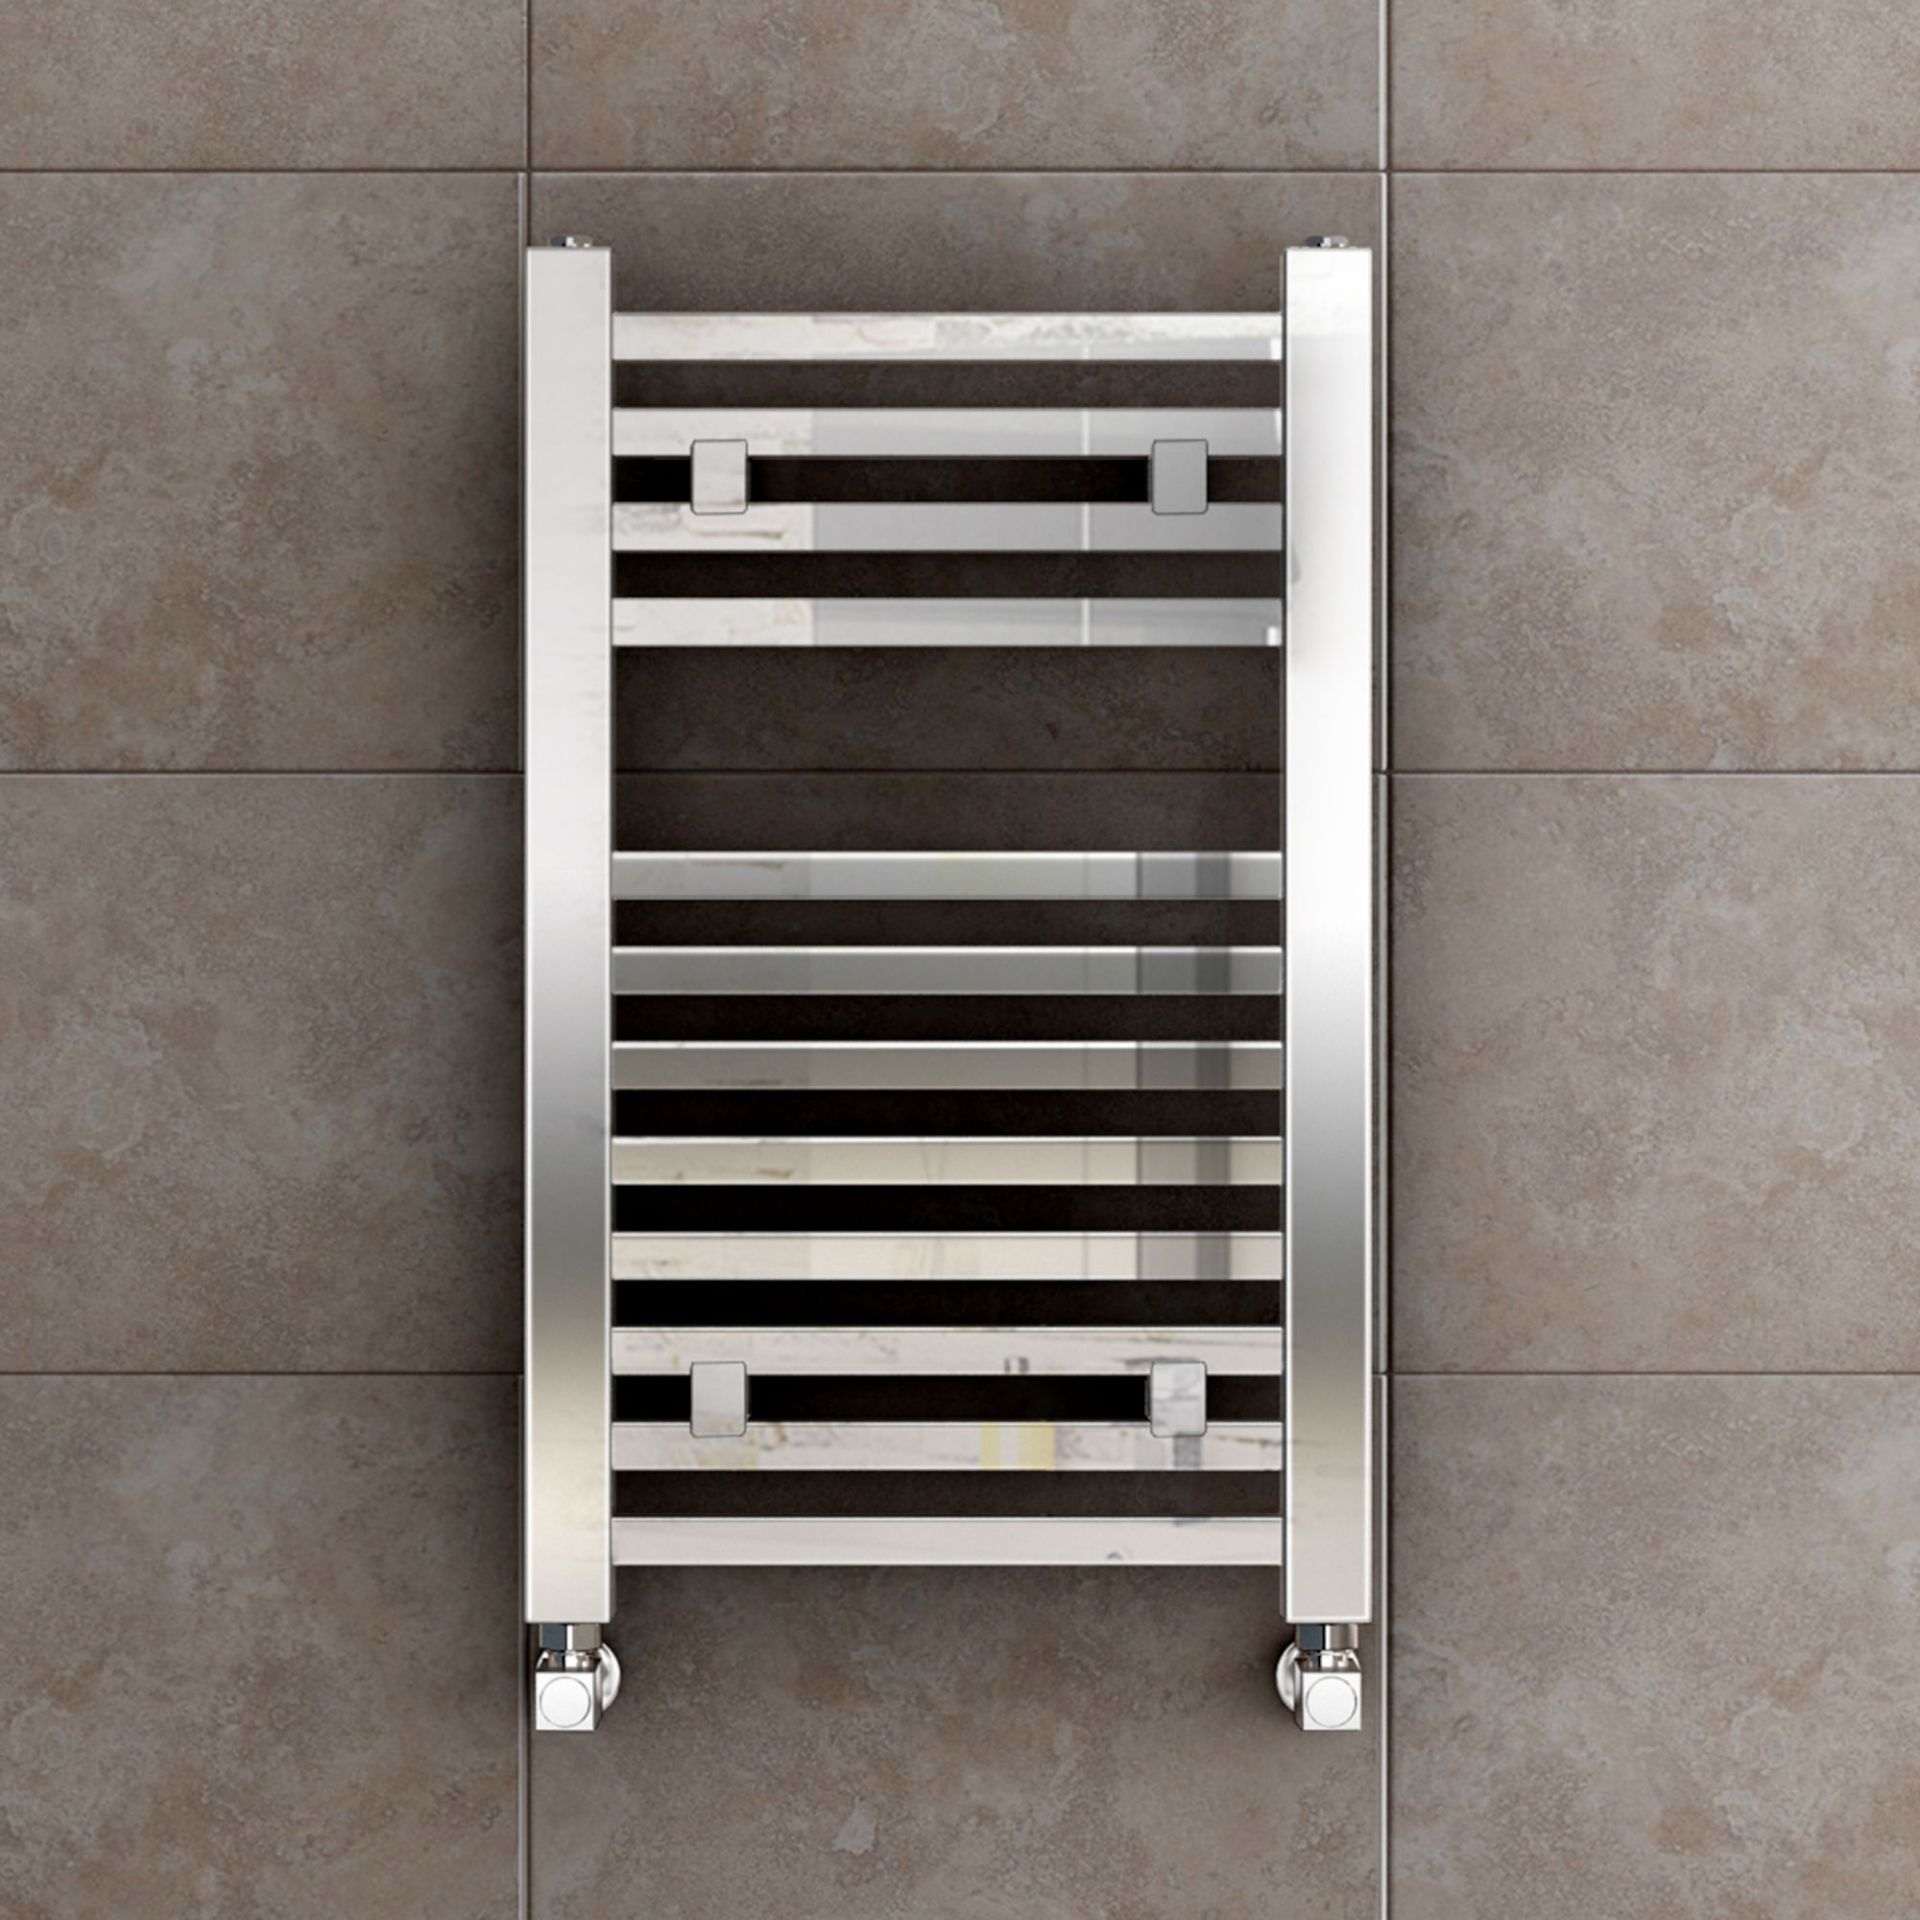 (TY18) 650x400mm Chrome Square Rail Ladder Towel Radiator. RRP £184.99. Made from low carbon steel